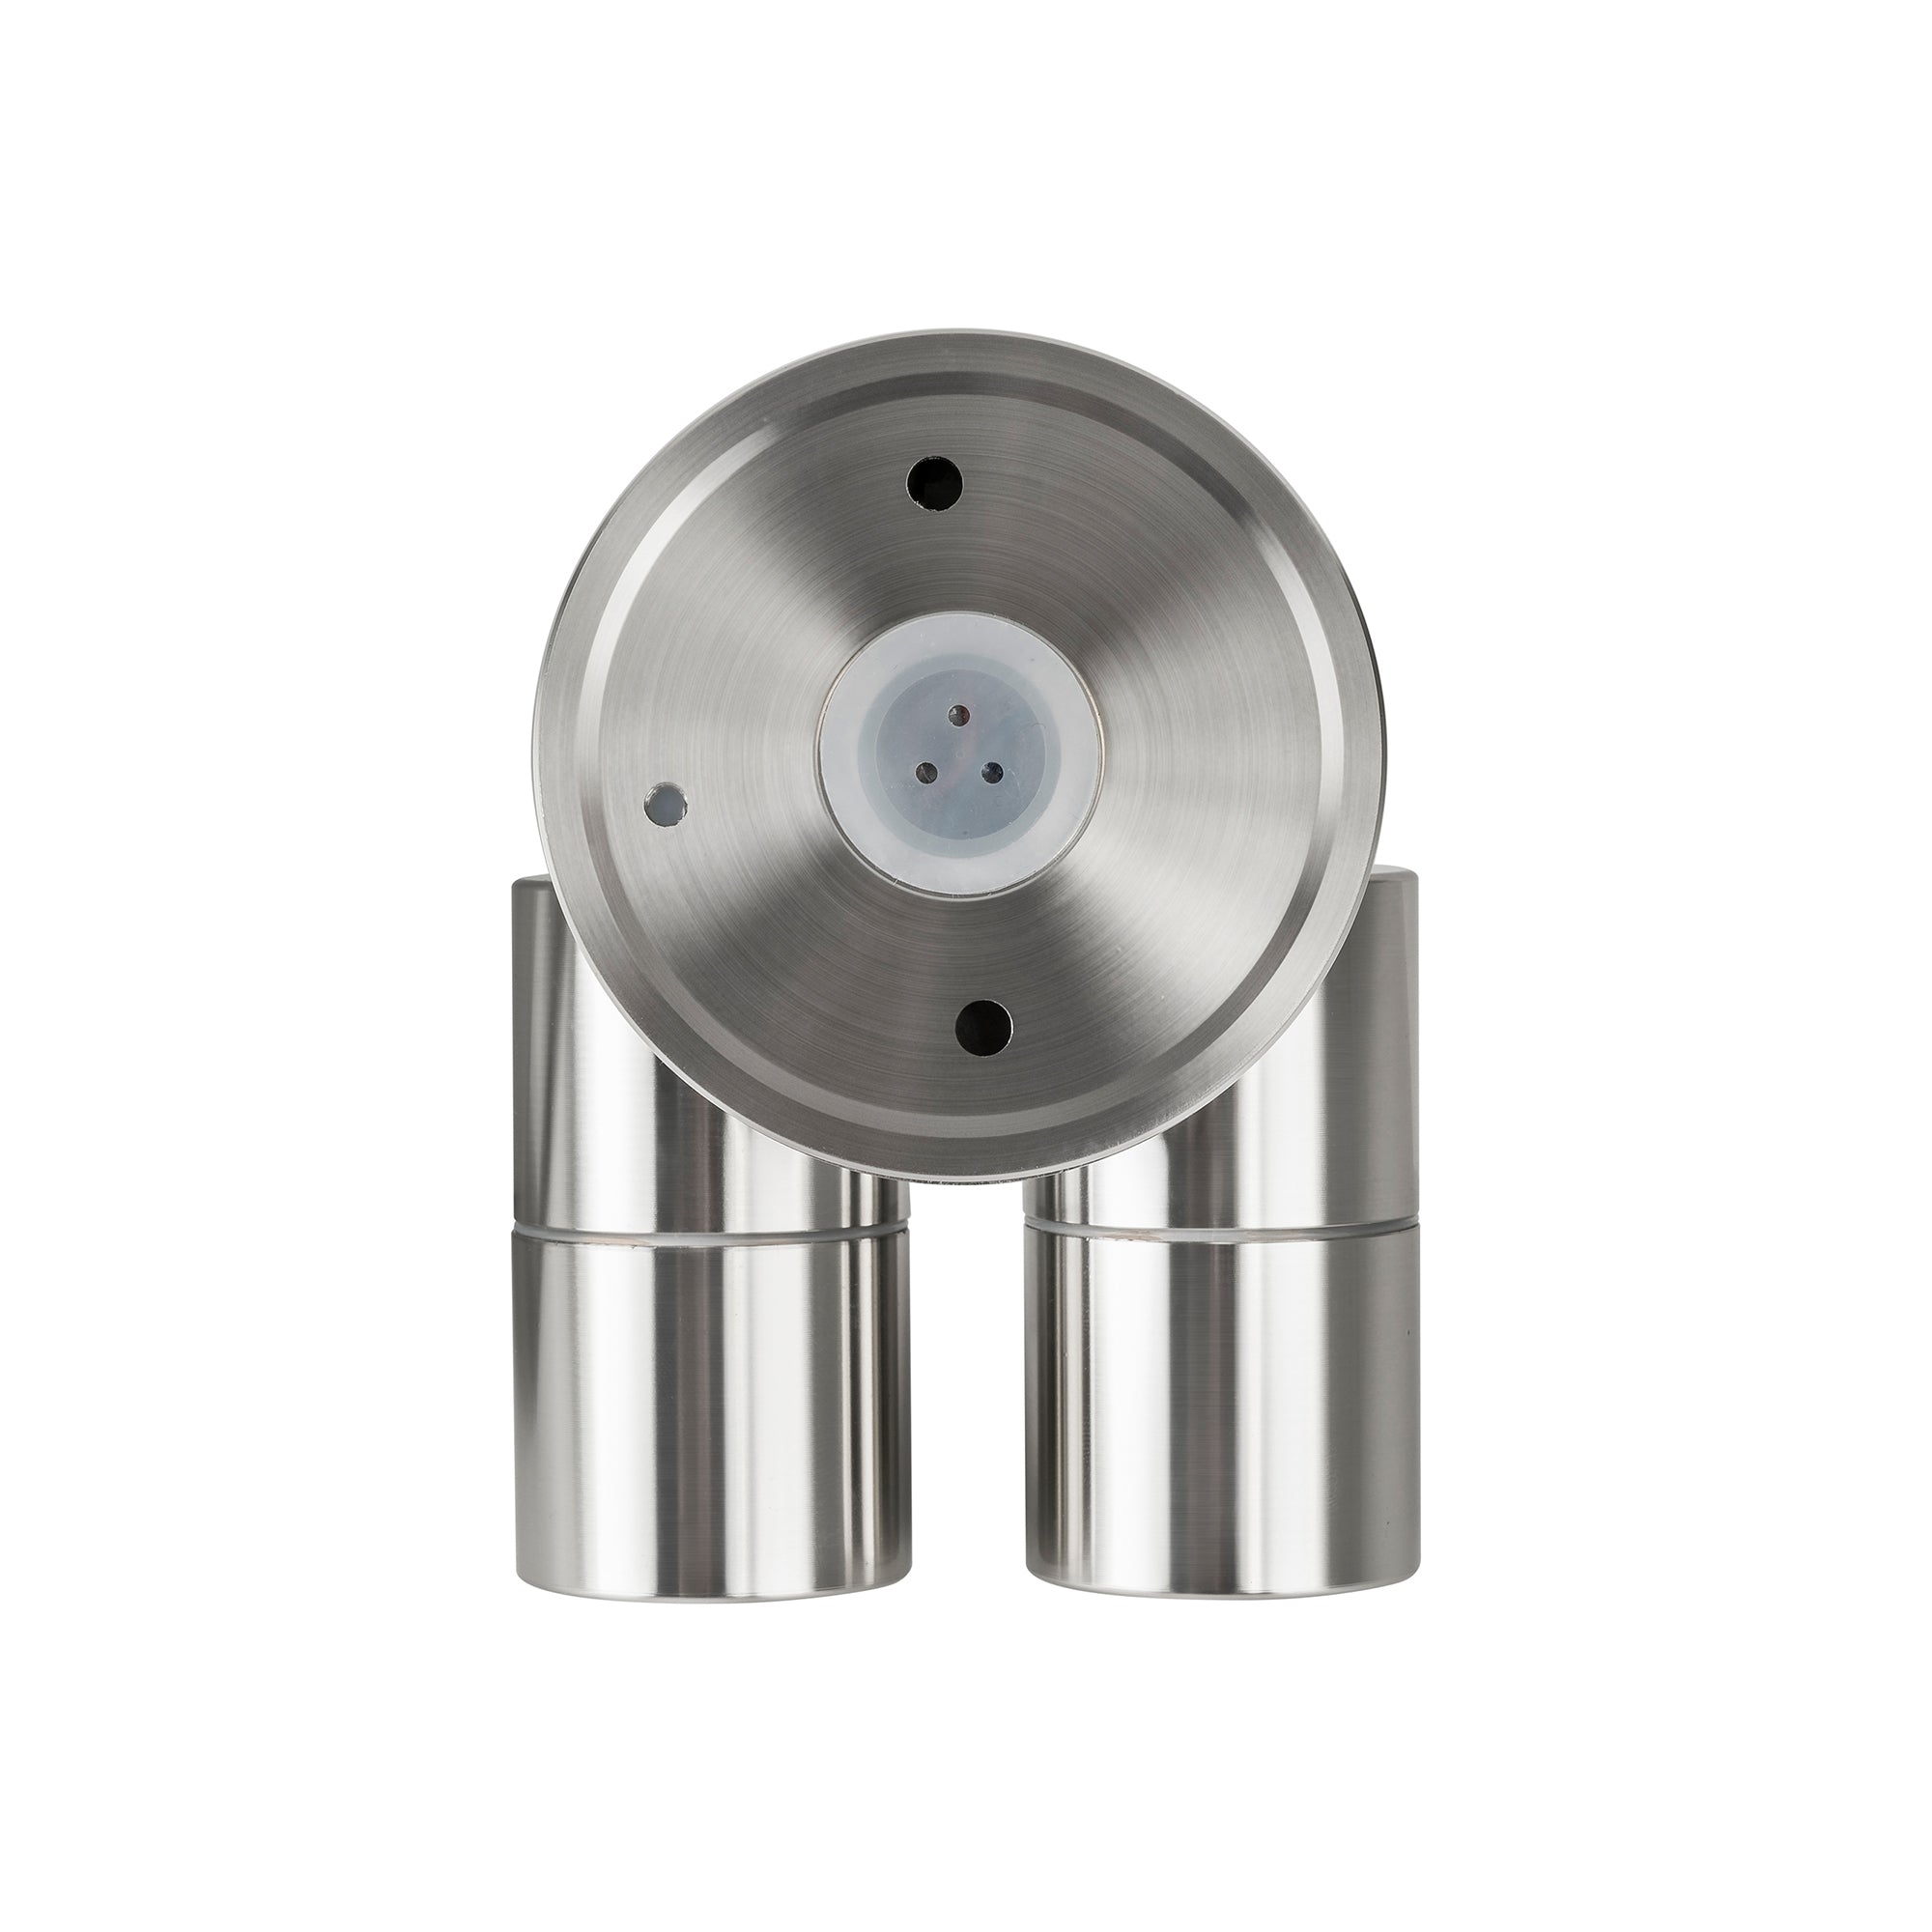 HV1307MR11NW - Mini Tivah 316 Stainless Steel Double Adjustable Wall Pillar Lights